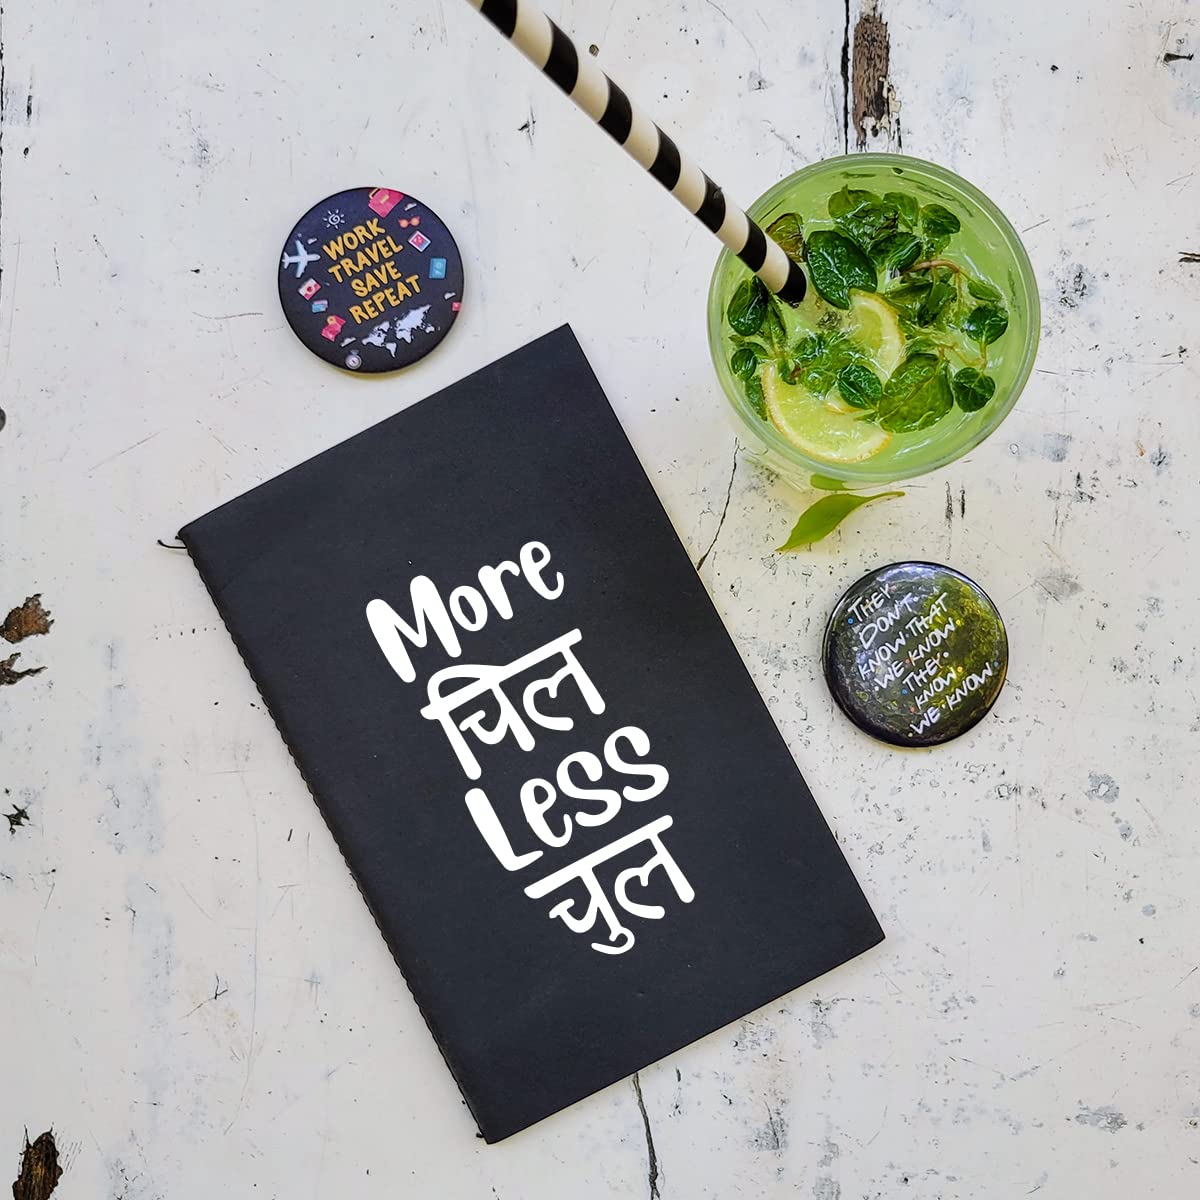 More Chill Less Chul - Black A5 Doodle Notebook - Kraft Cover Notebook - A5 - 300 GSM Kraft Cover - Handmade - Unruled - 80 Pages - Natural Shade Pages 120 GSM - Funny Quotes & Quirky, Funky designs